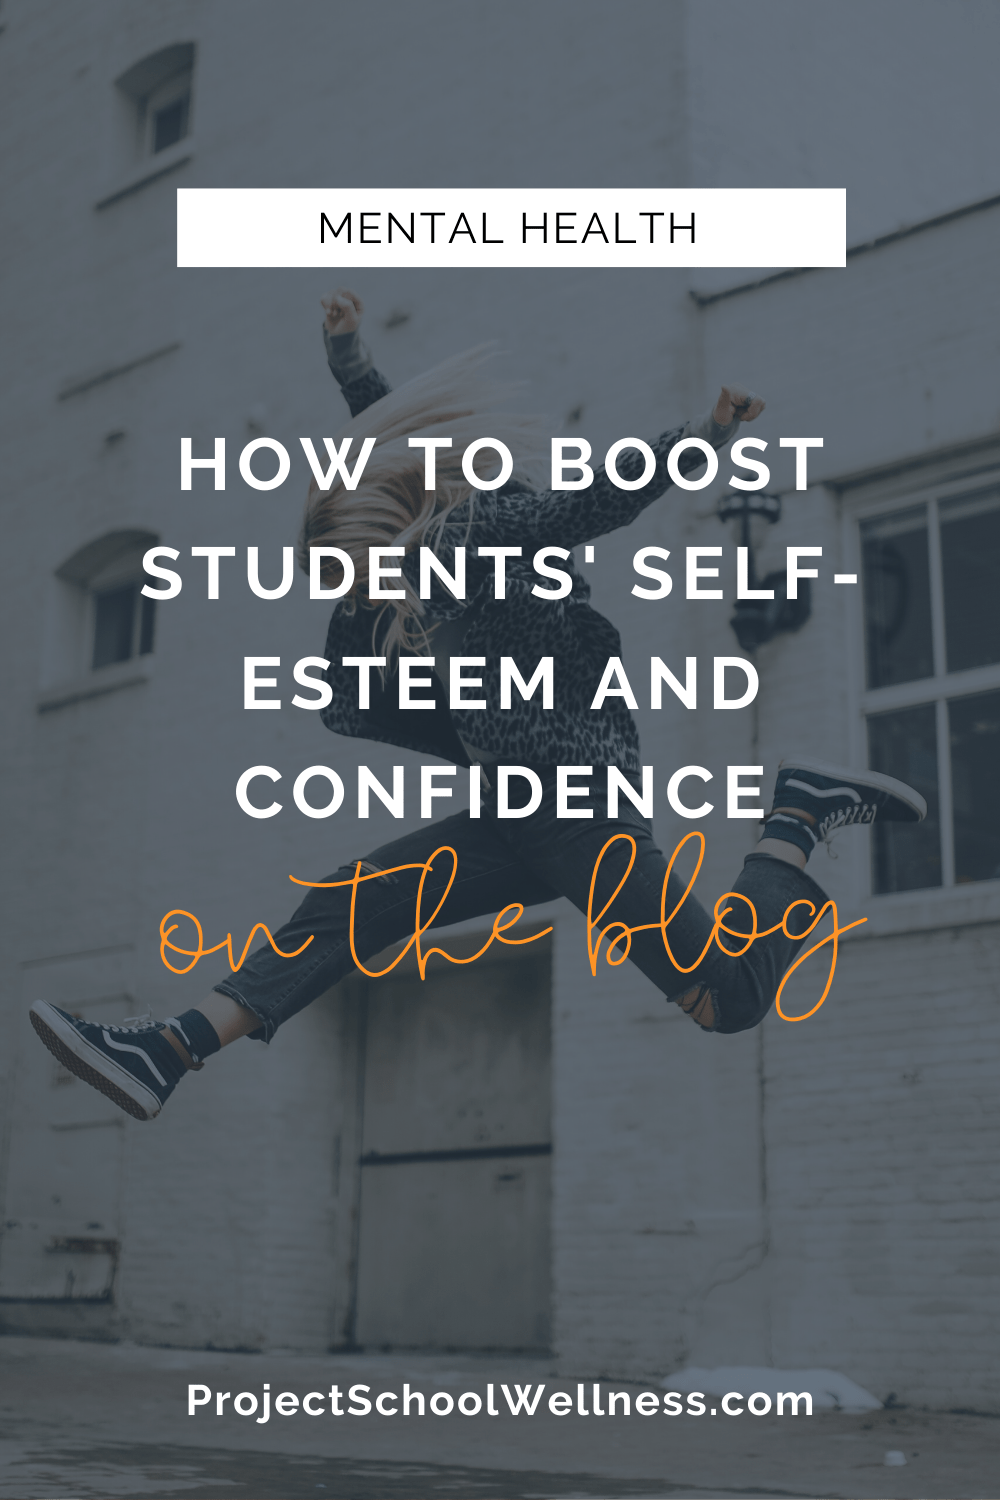 Mental Health Education Tips - How to boost students' self-esteem and self-confidence - Project School Wellness, Health Education Lesson Plans and Resources